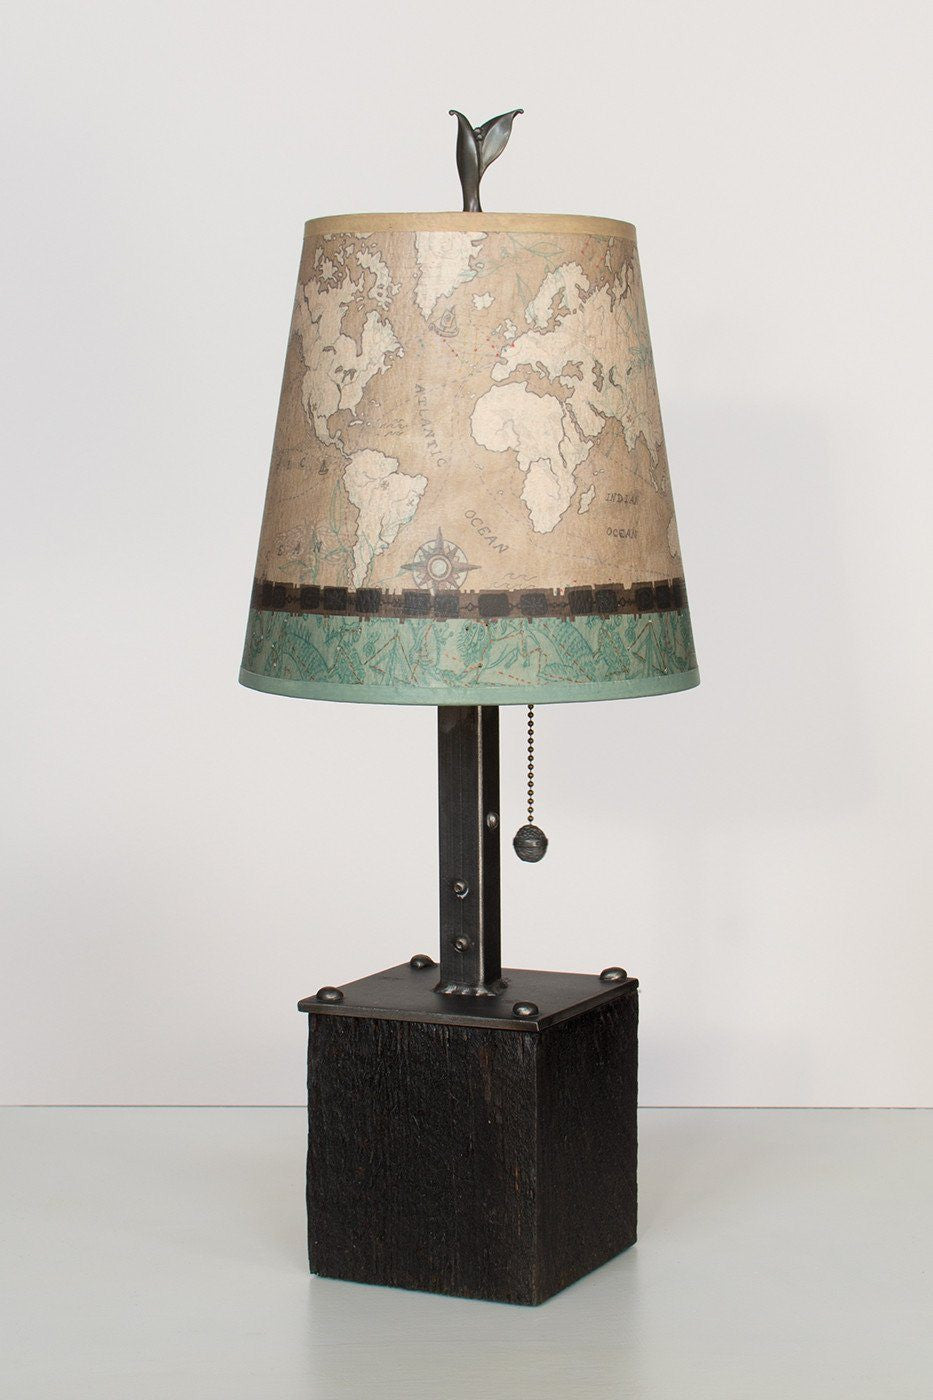 Steel Table Lamp on Reclaimed Wood with Small Drum Shade in Sand Map